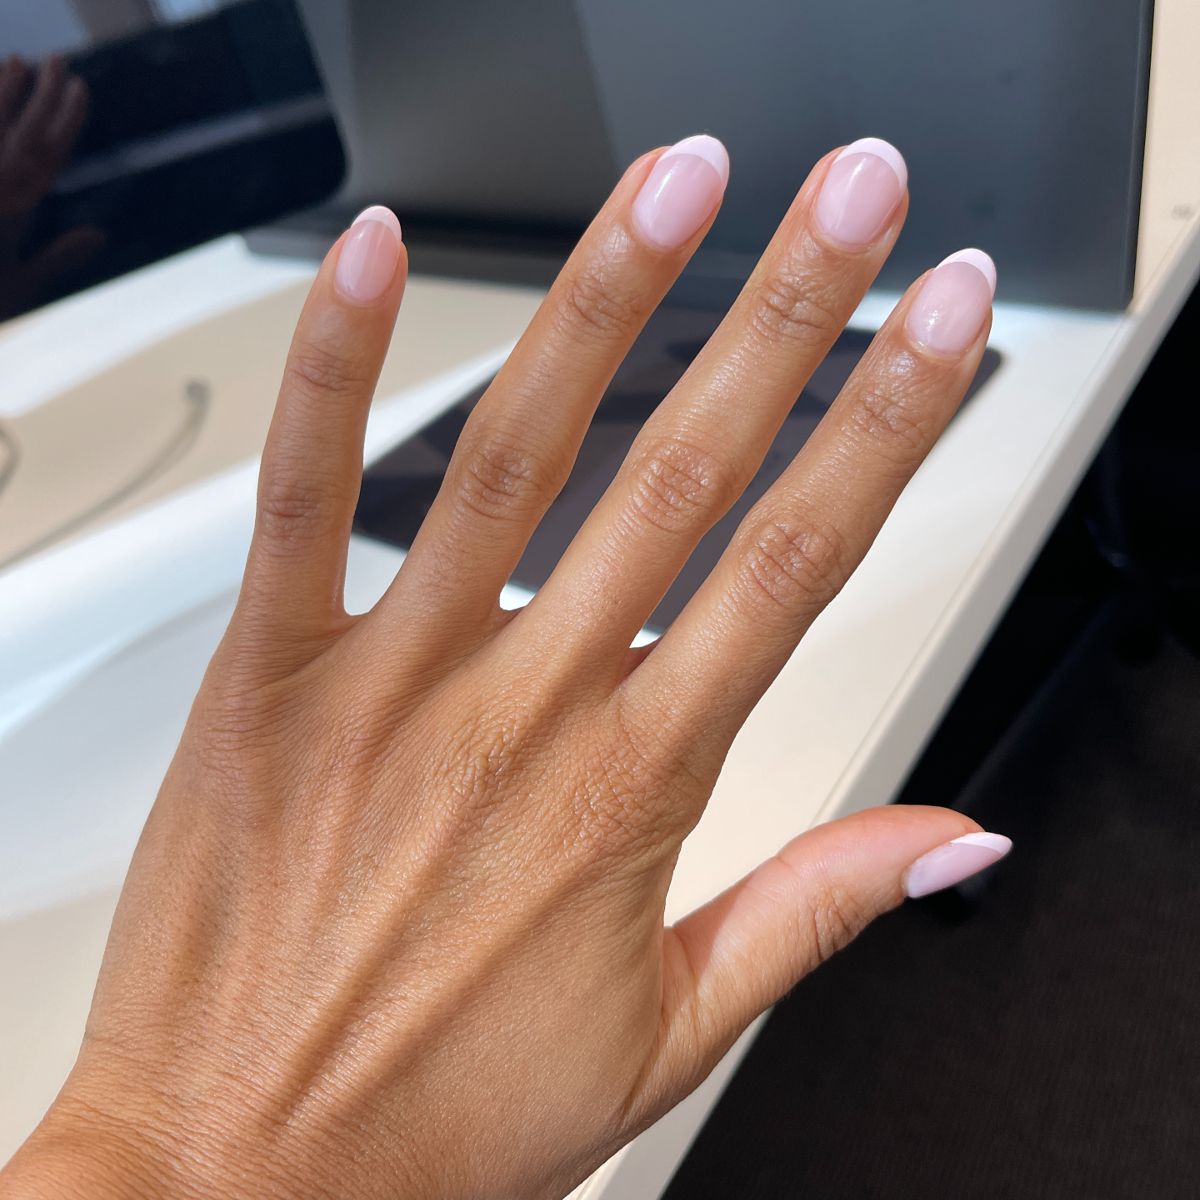 Understanding Nail Gel Lifting and the Role of Builder Gels